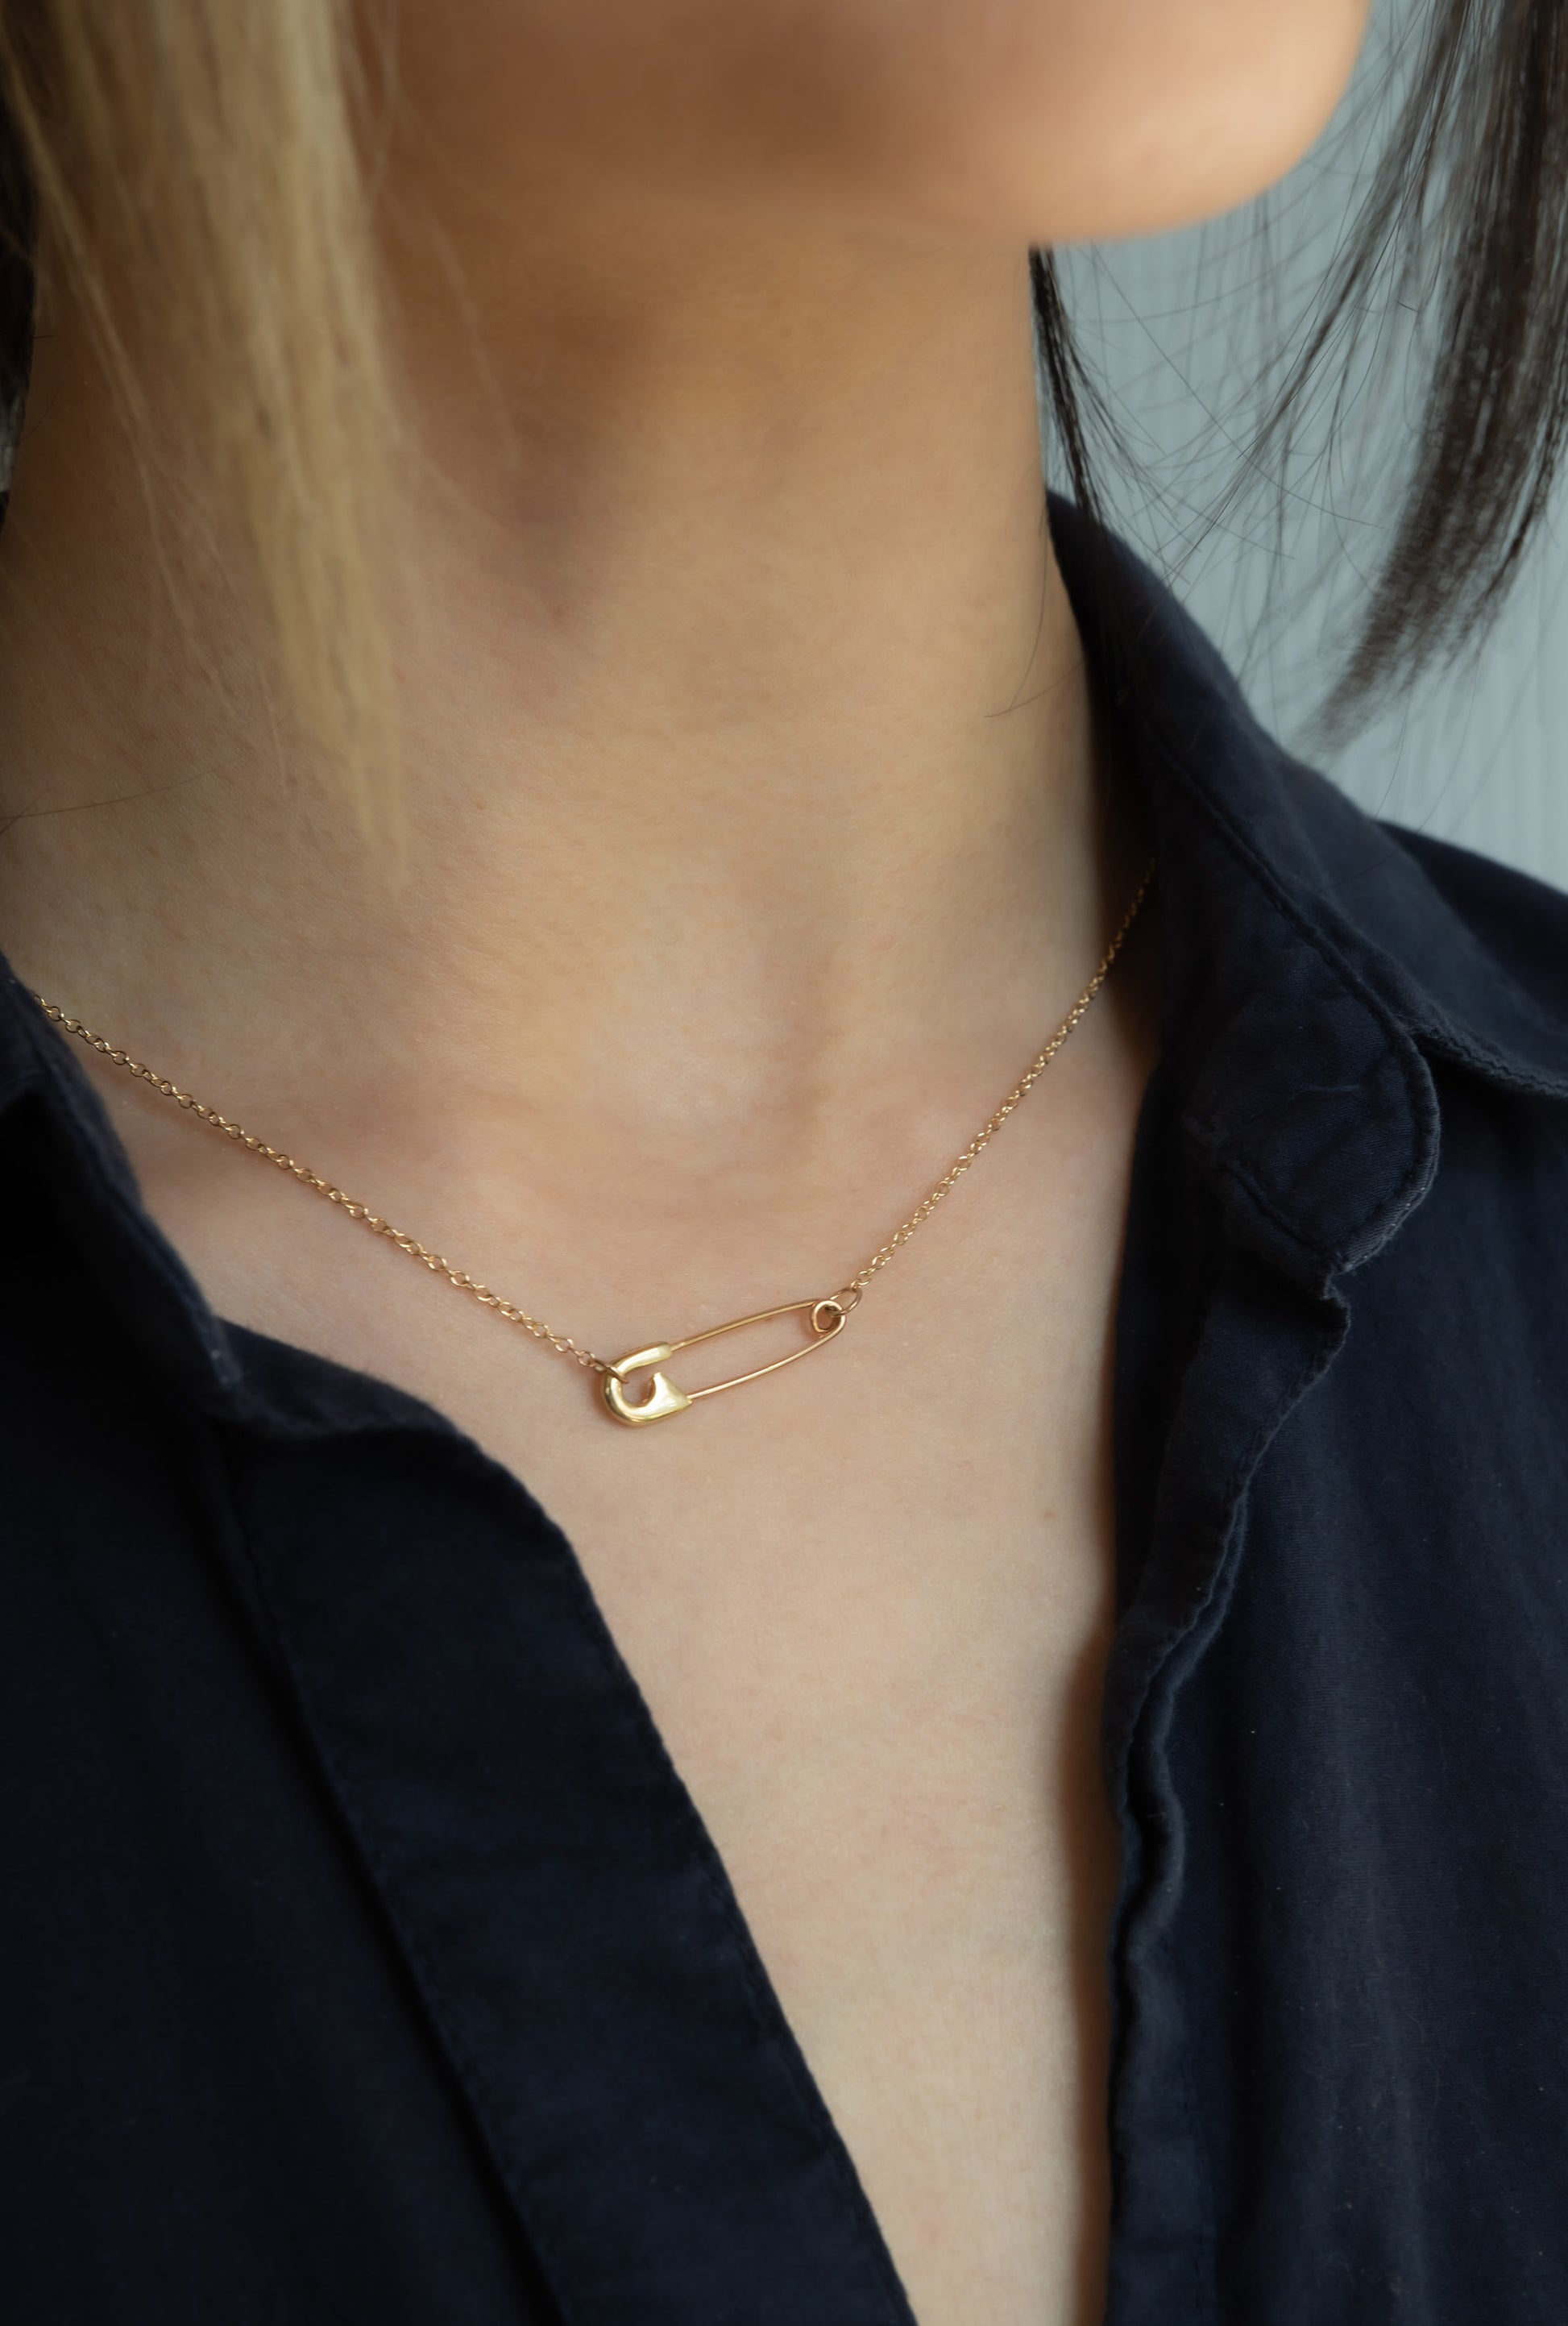 Safety Pin and Lock Chain Necklace gold – ADORNIA